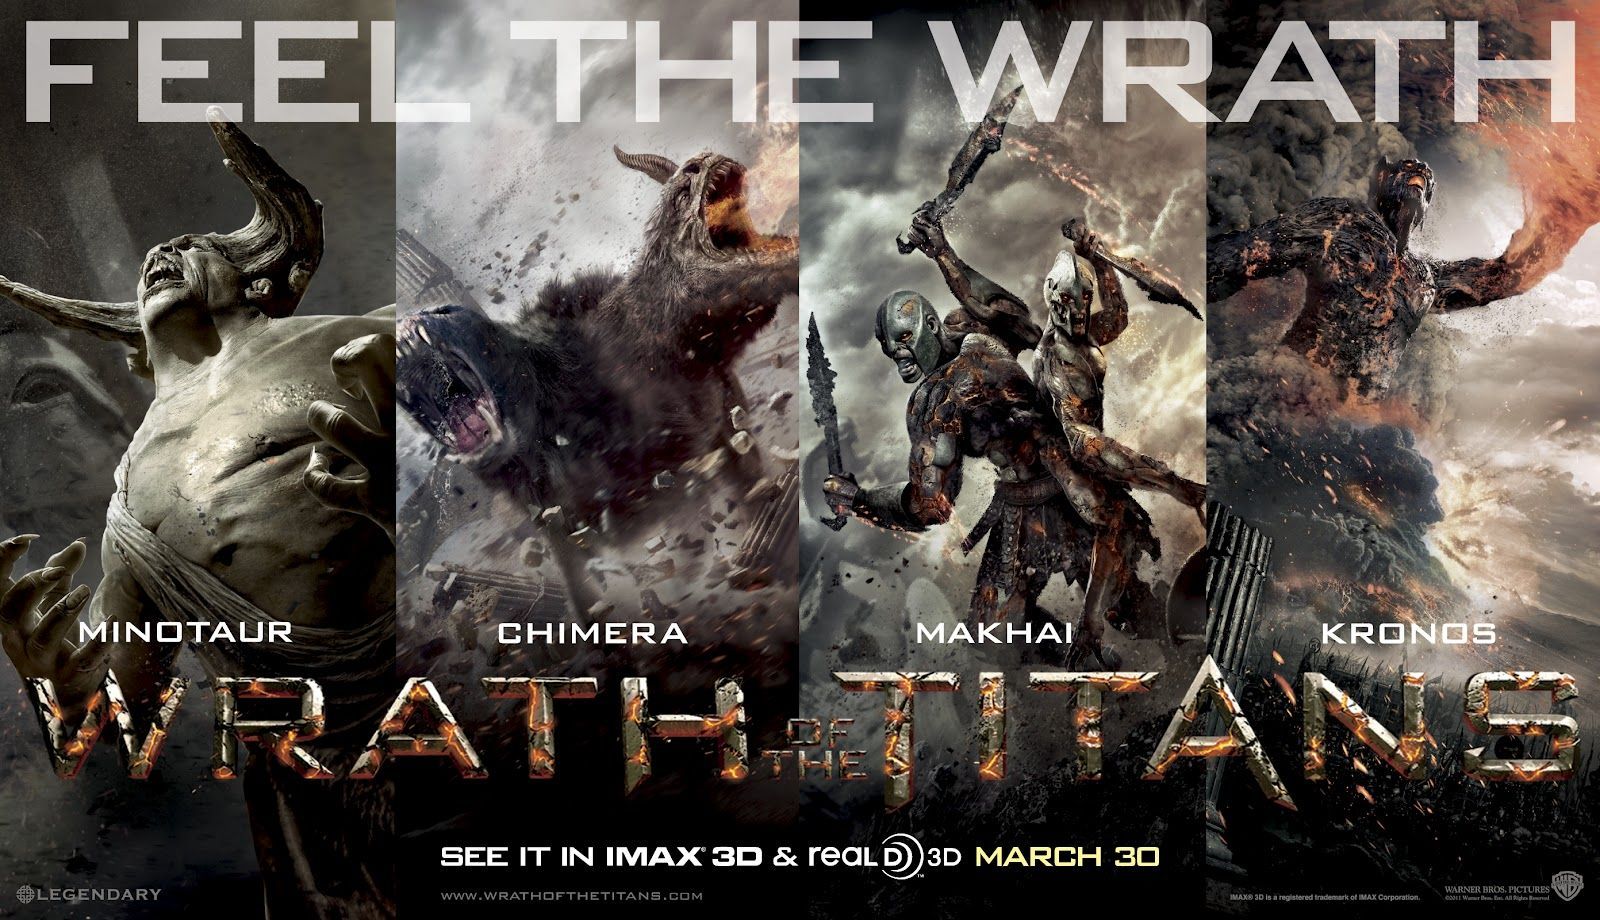 Feel the Wrath of The Titans.I did and it was awesome!. Wrath of the titans, Clash of the titans, Wrath